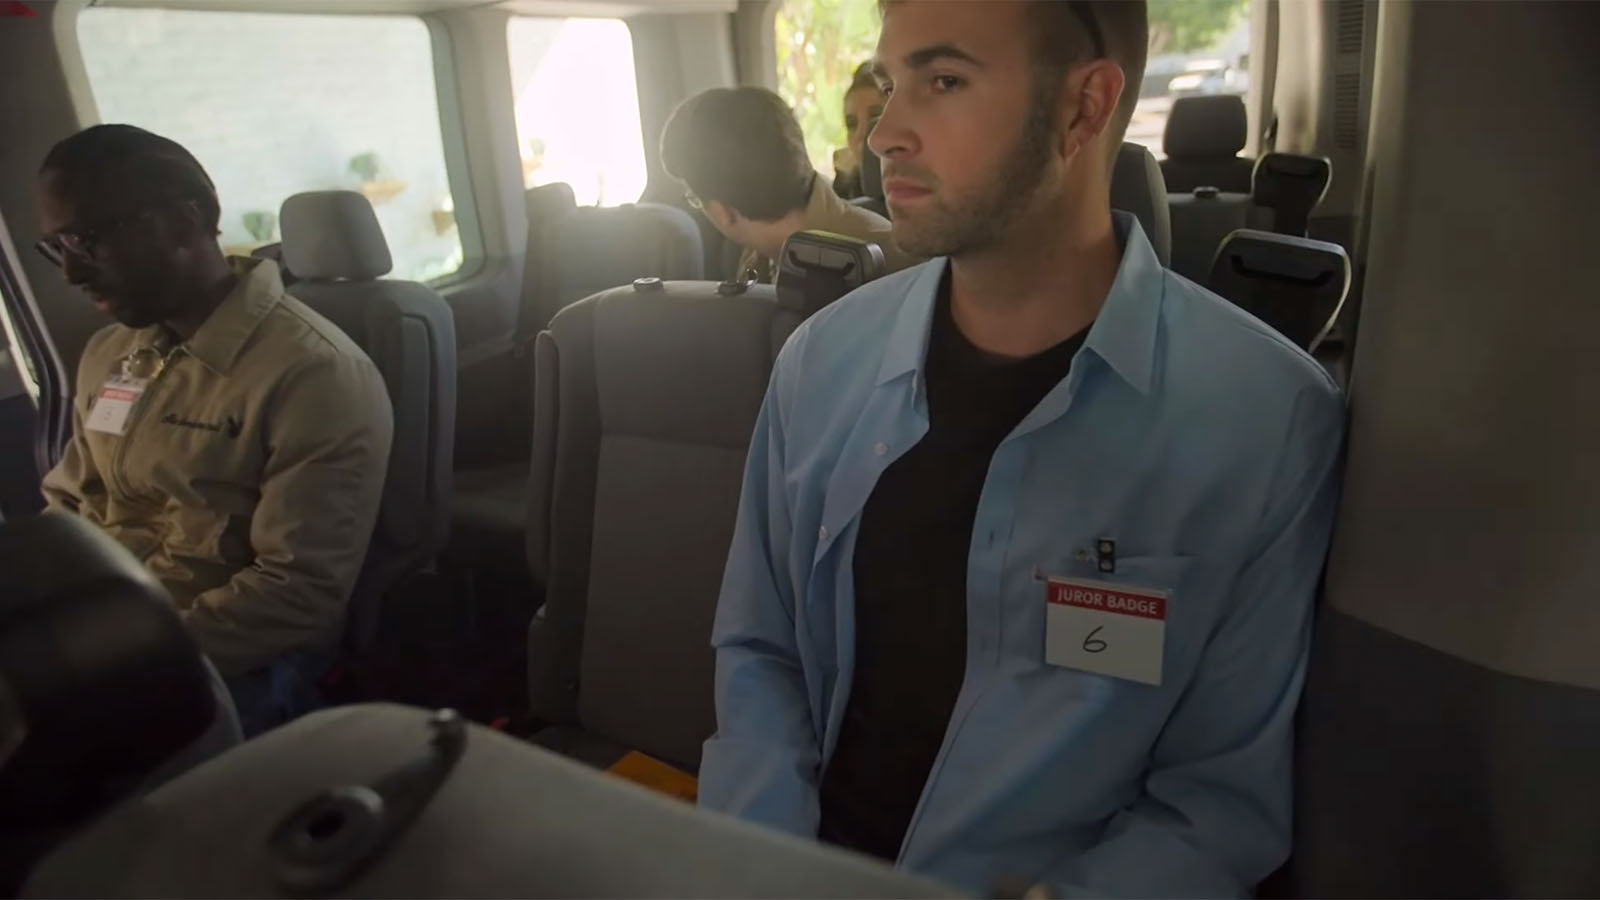 Even in the shuttle bus, the cameras were rolling. Image © Amazon Prime Video